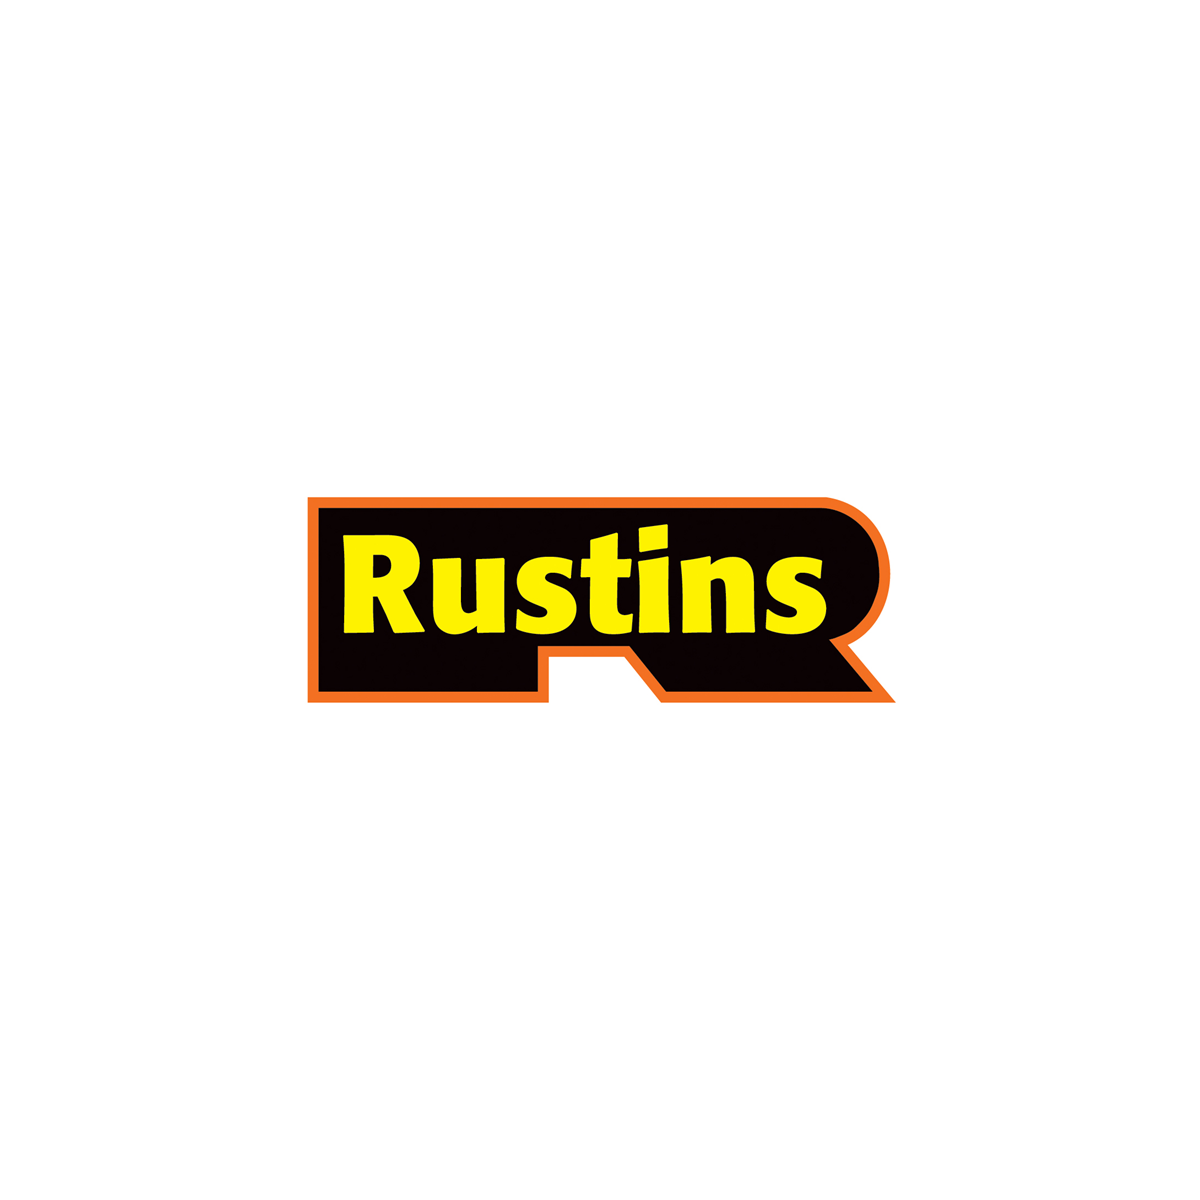 Where to buy Rustins Gold Paint